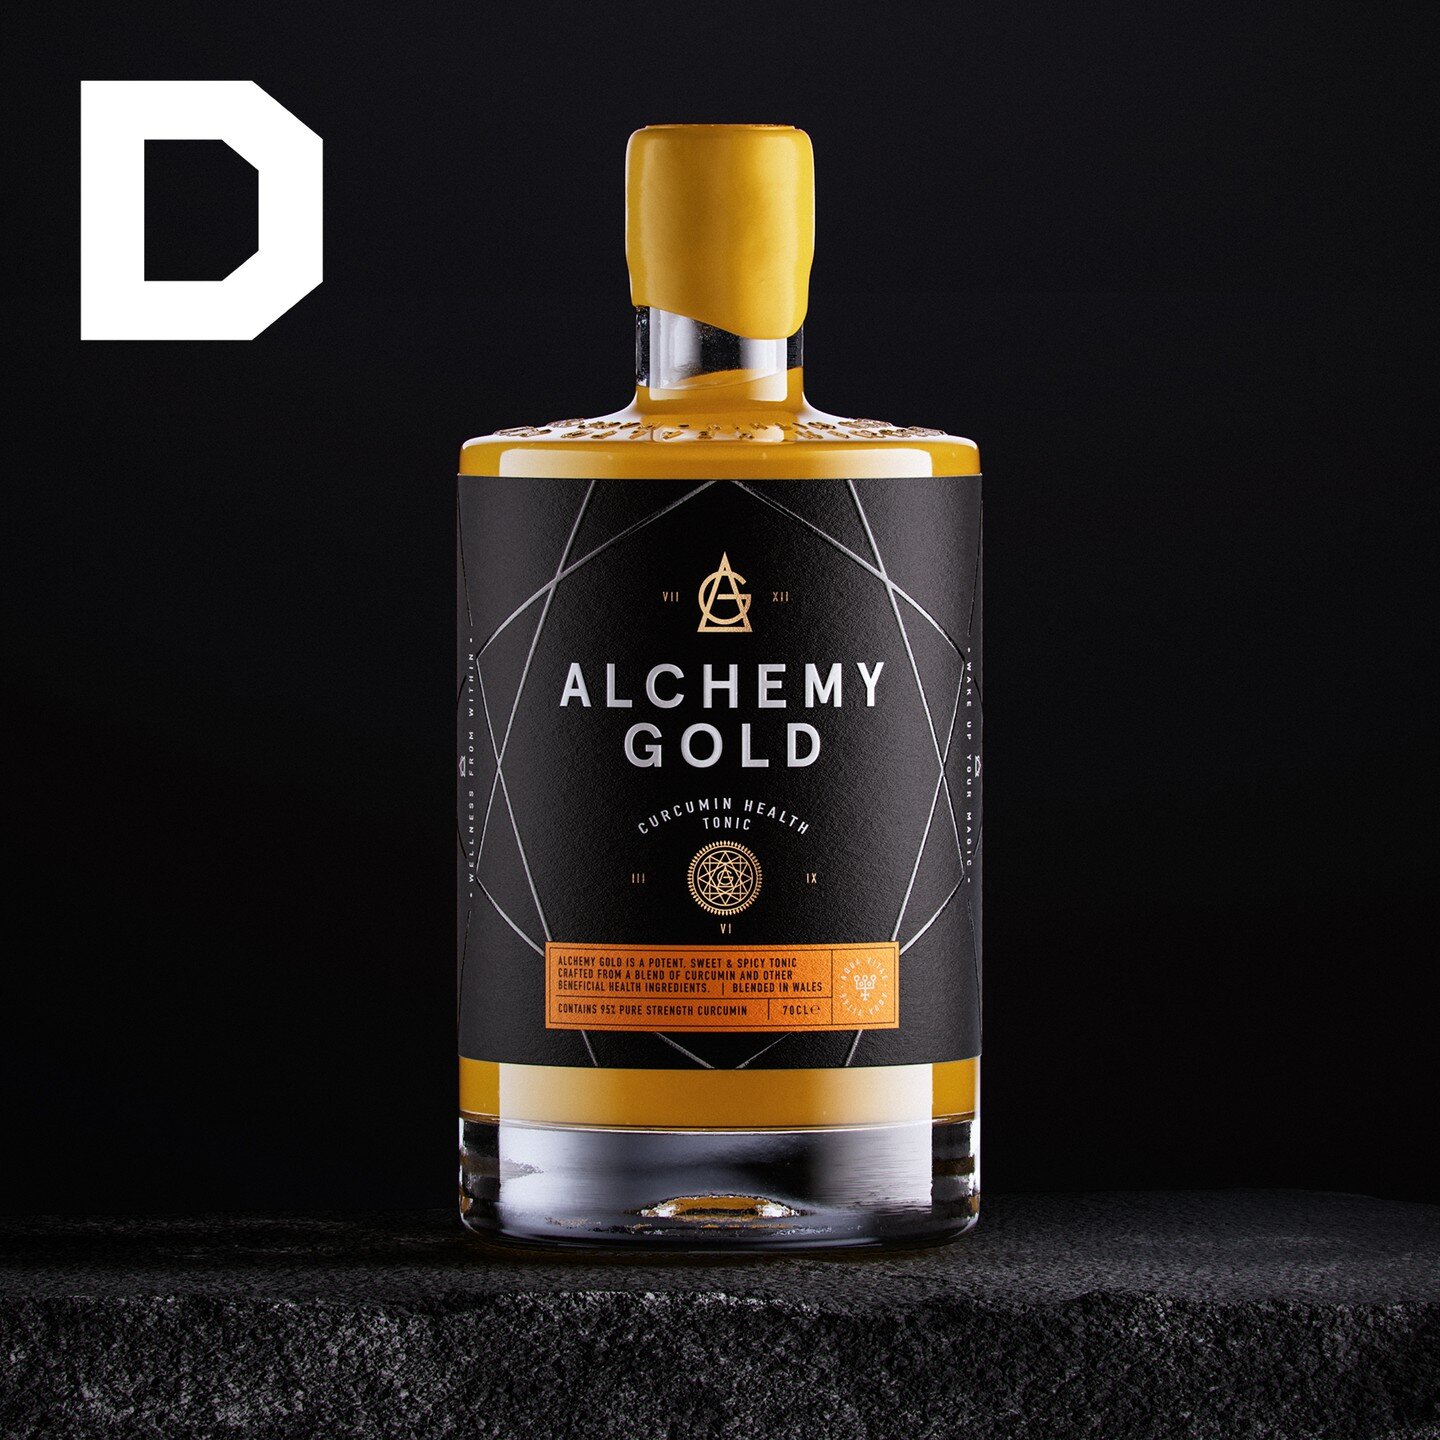 Our packaging for @alchemygolduk now featured on @thedieline 

Image: @tricyclestudio 

https://thedieline.com/blog/2023/10/11/alchemy-golds-enchanting-representation

#design #branding #packagingdesign #graphicdesign #packagingdesign #thedieline #di